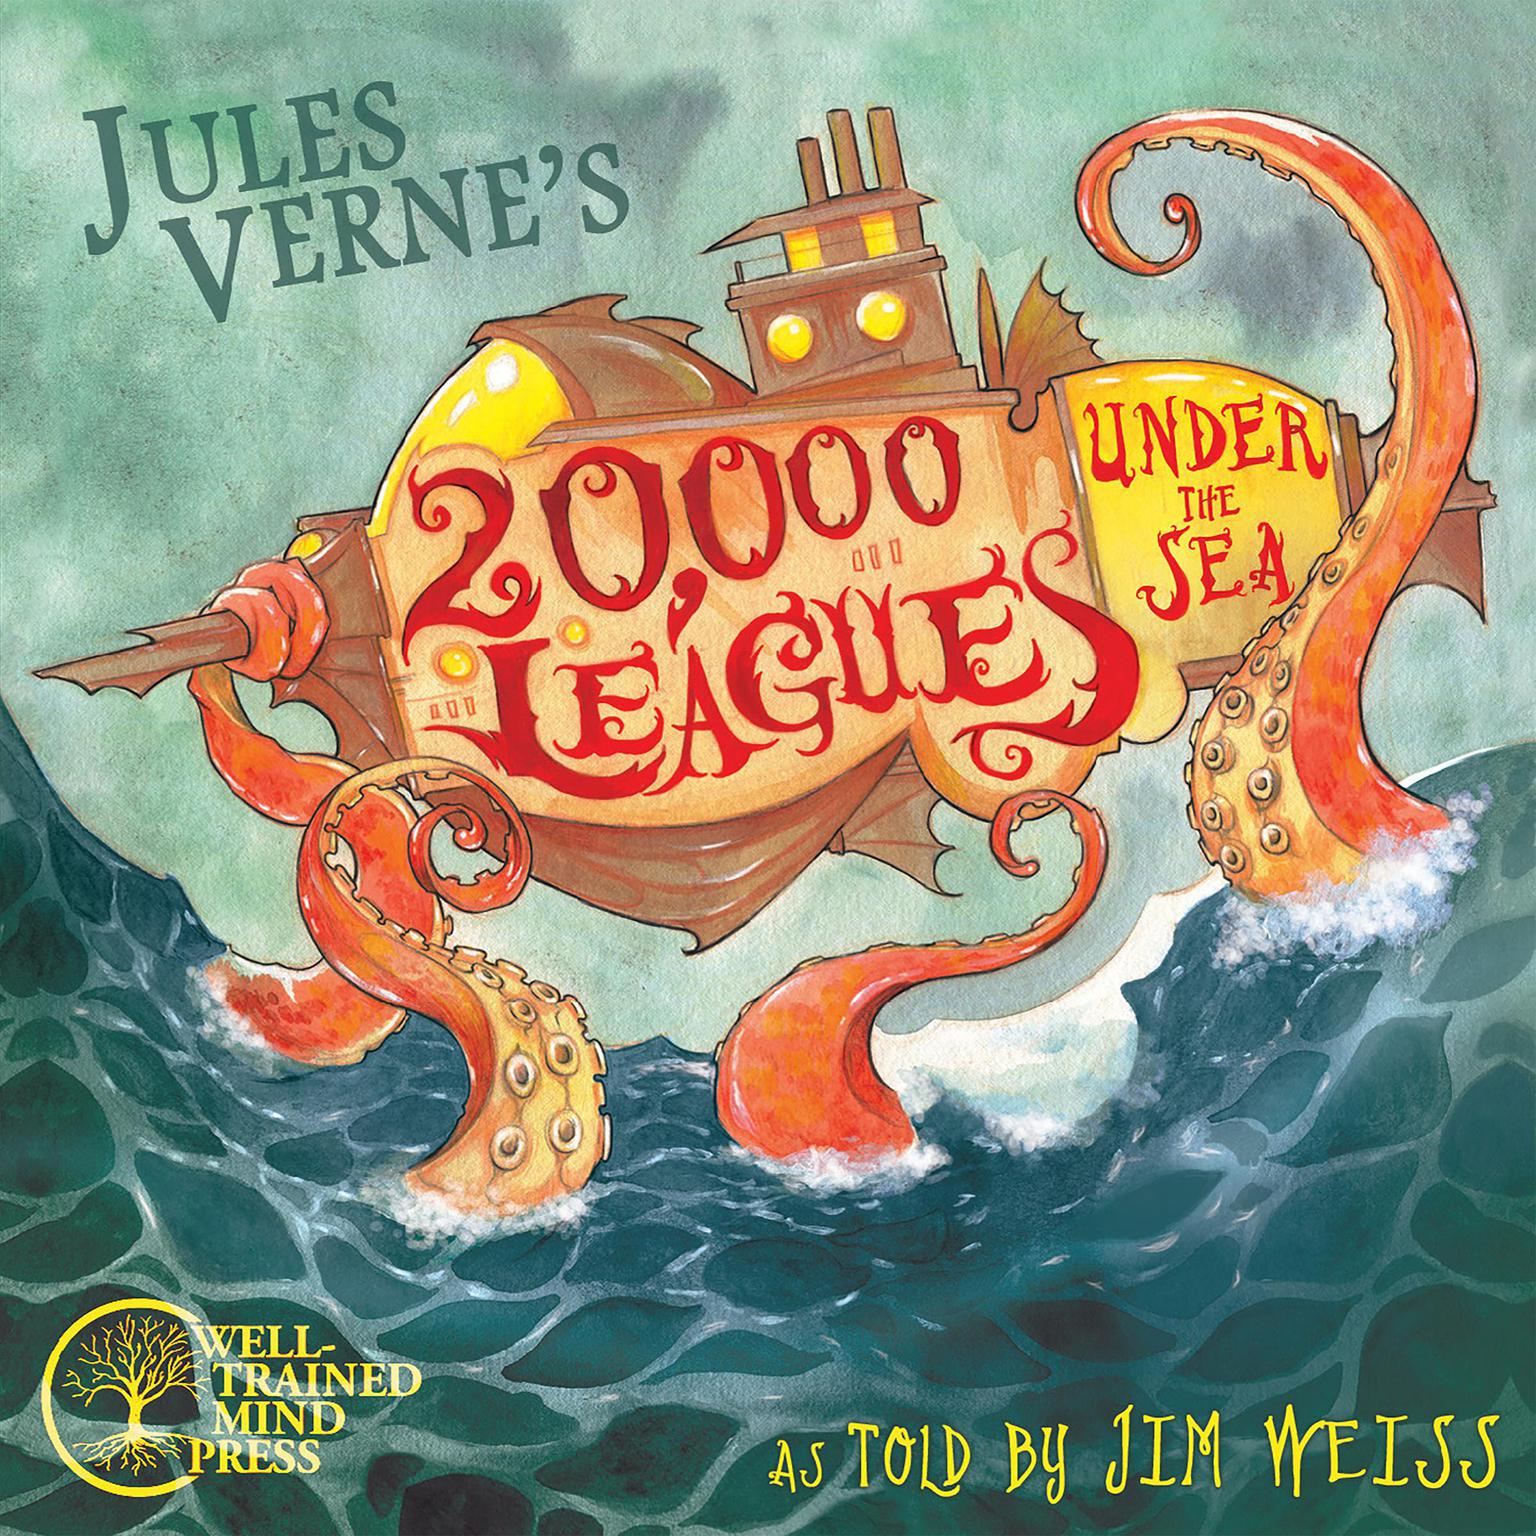 Twenty Thousand Leagues Under the Sea Audiobook, by Jules Verne